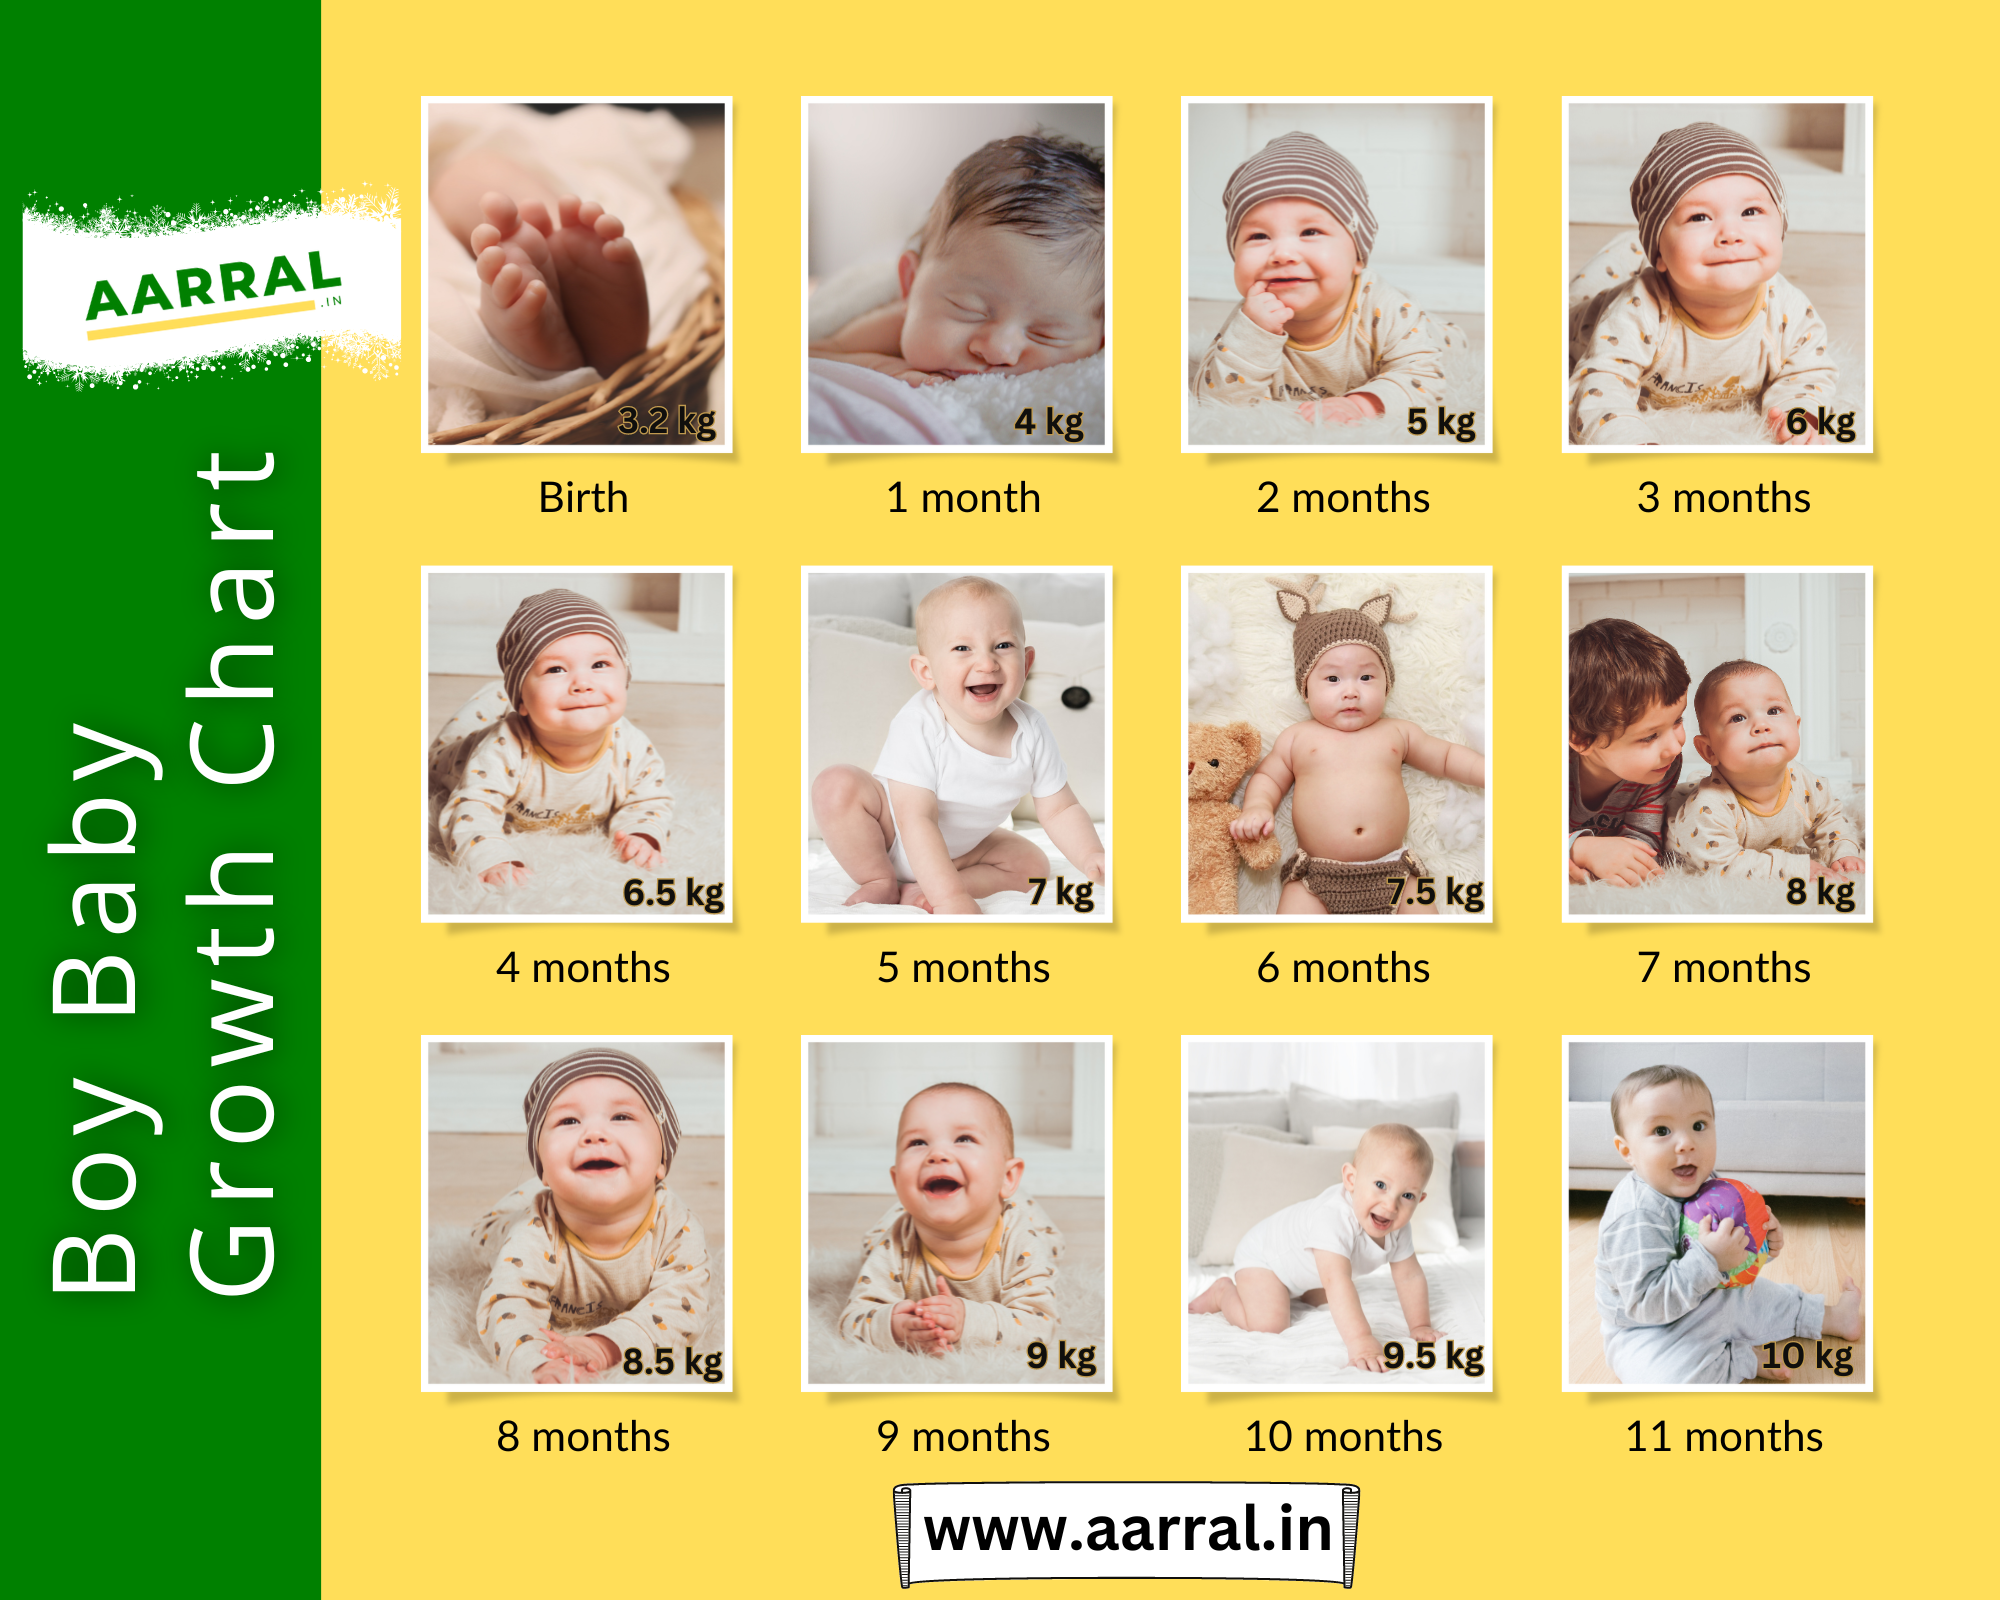 Average Baby Boy Weight Chart 1 to 12 Months Growth (in KG)